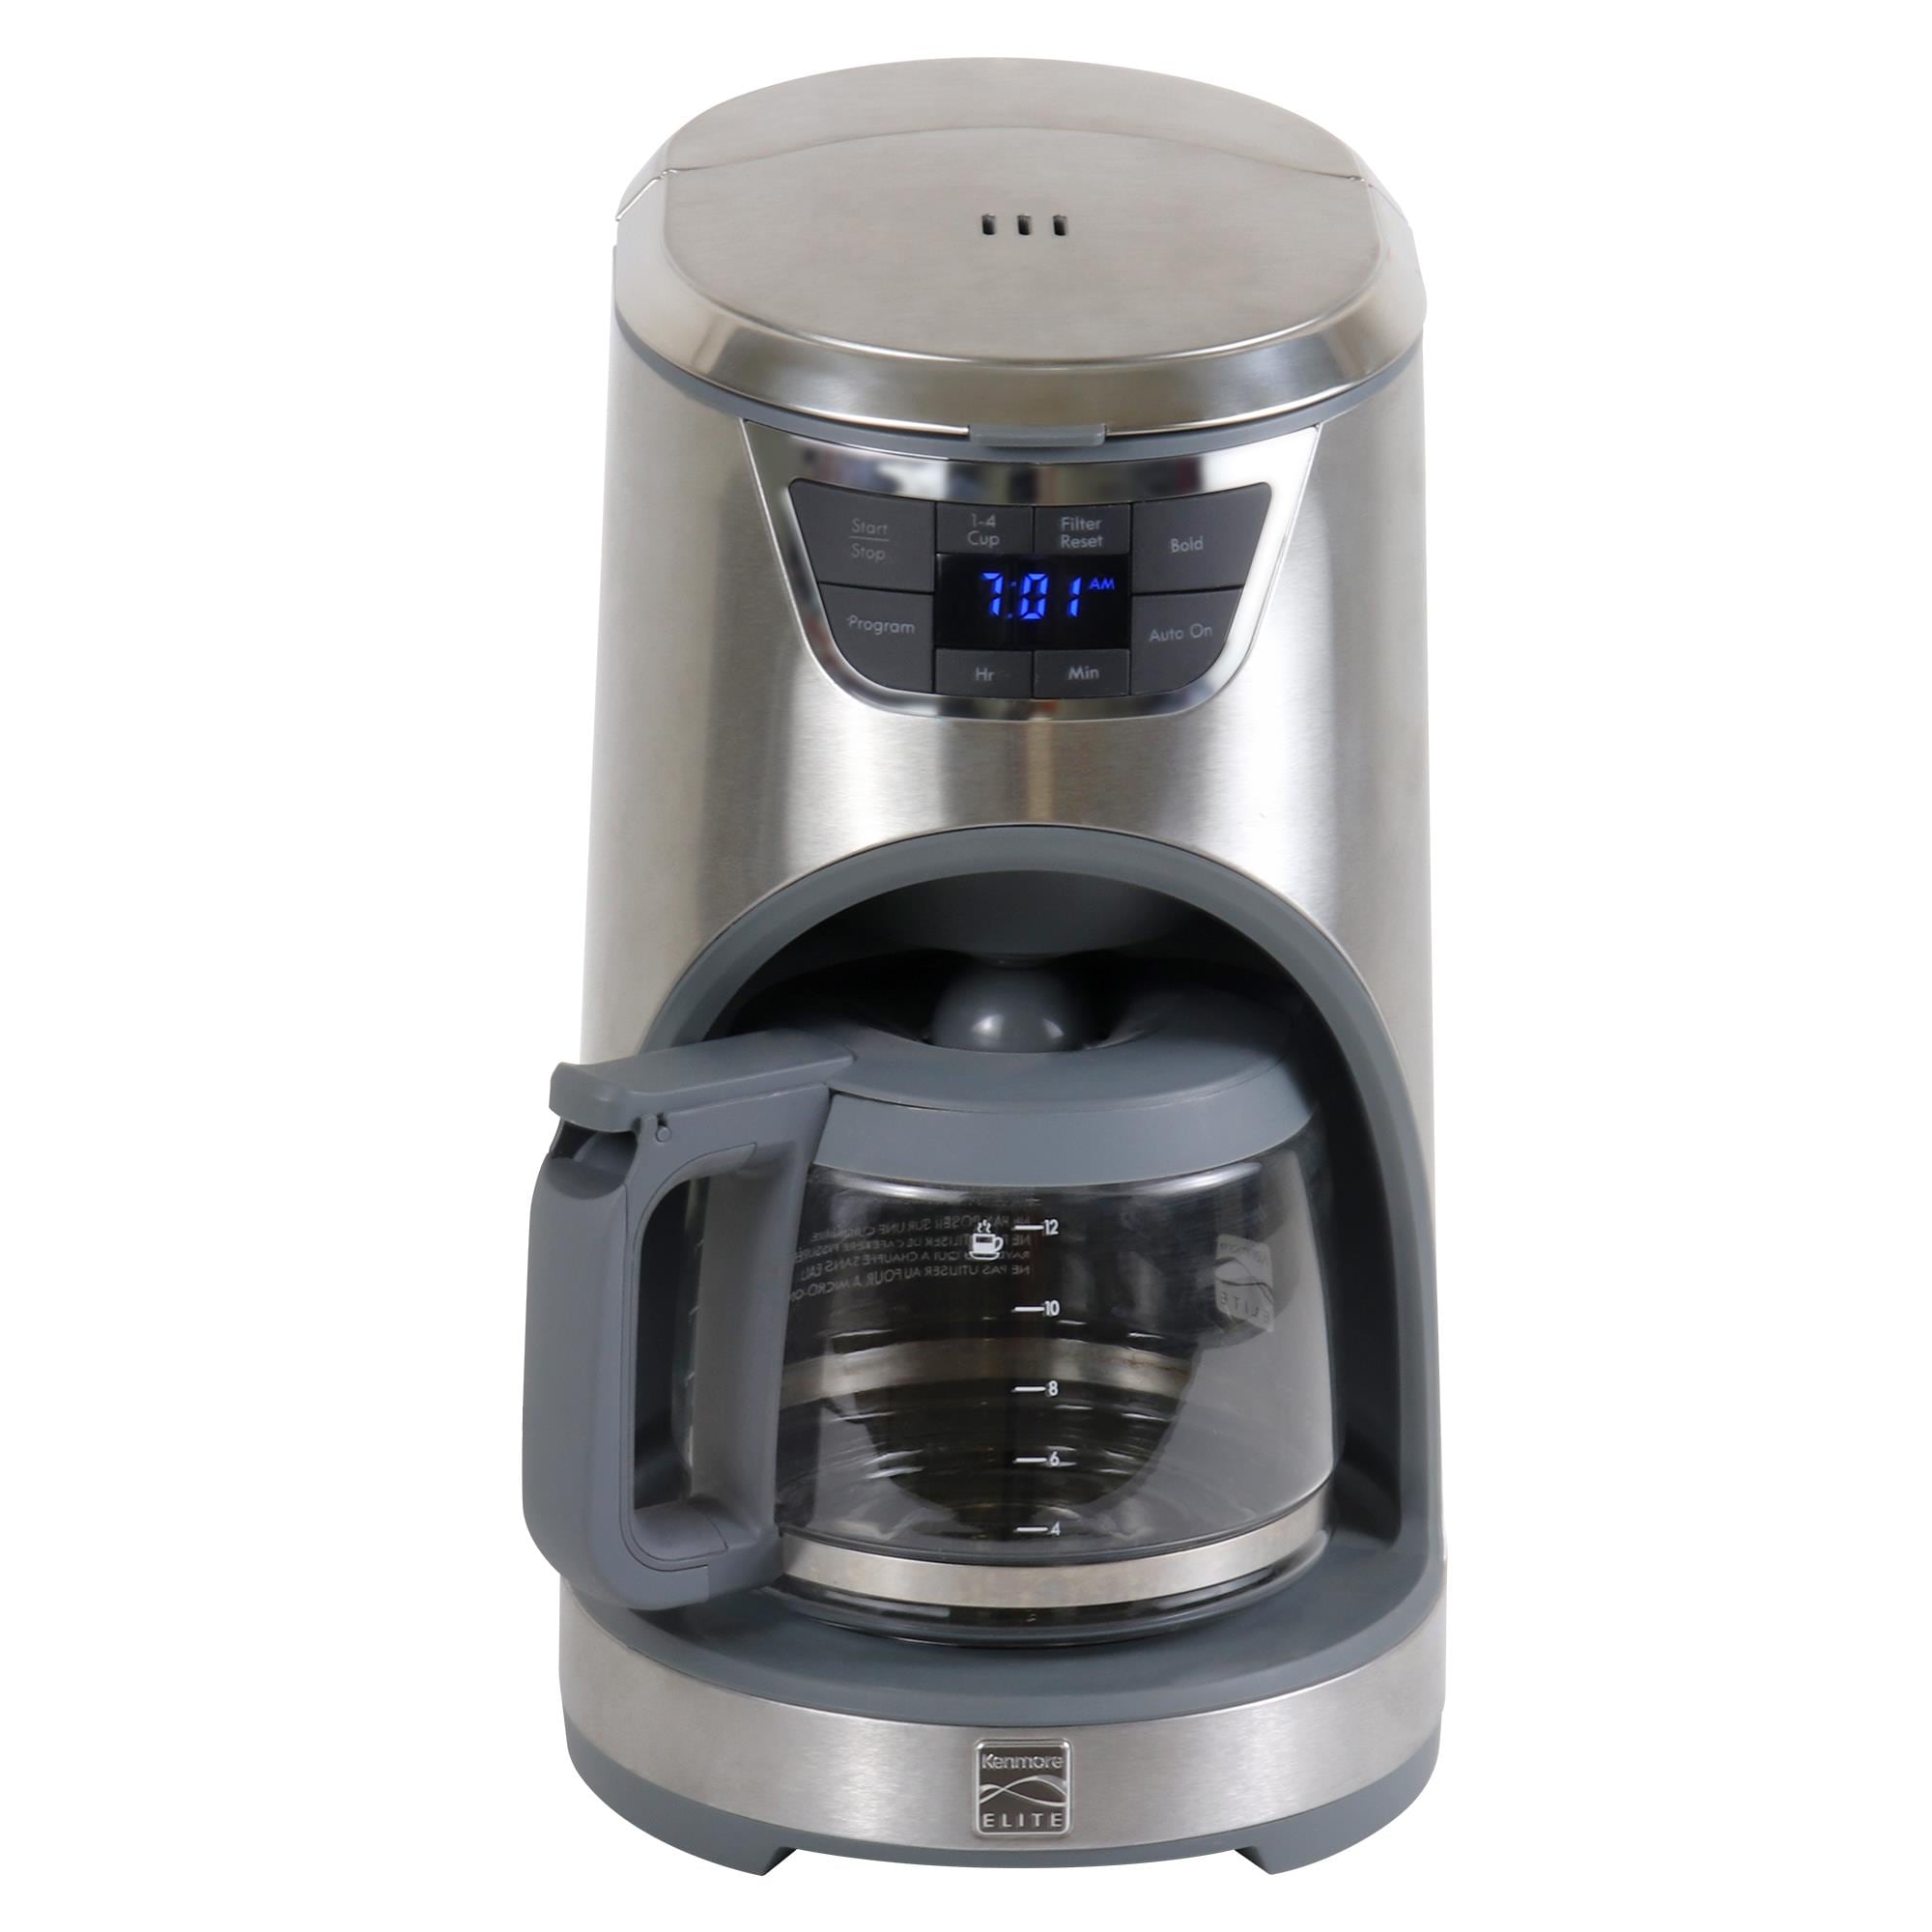  Kenmore Aroma Control 12-Cup Programmable Coffee Maker, White  and Stainless Steel Drip Coffee Machine, Glass Carafe, Reusable Filter,  Timer, Digital Display, Charcoal Water Filter, Regular or Bold : Home &  Kitchen